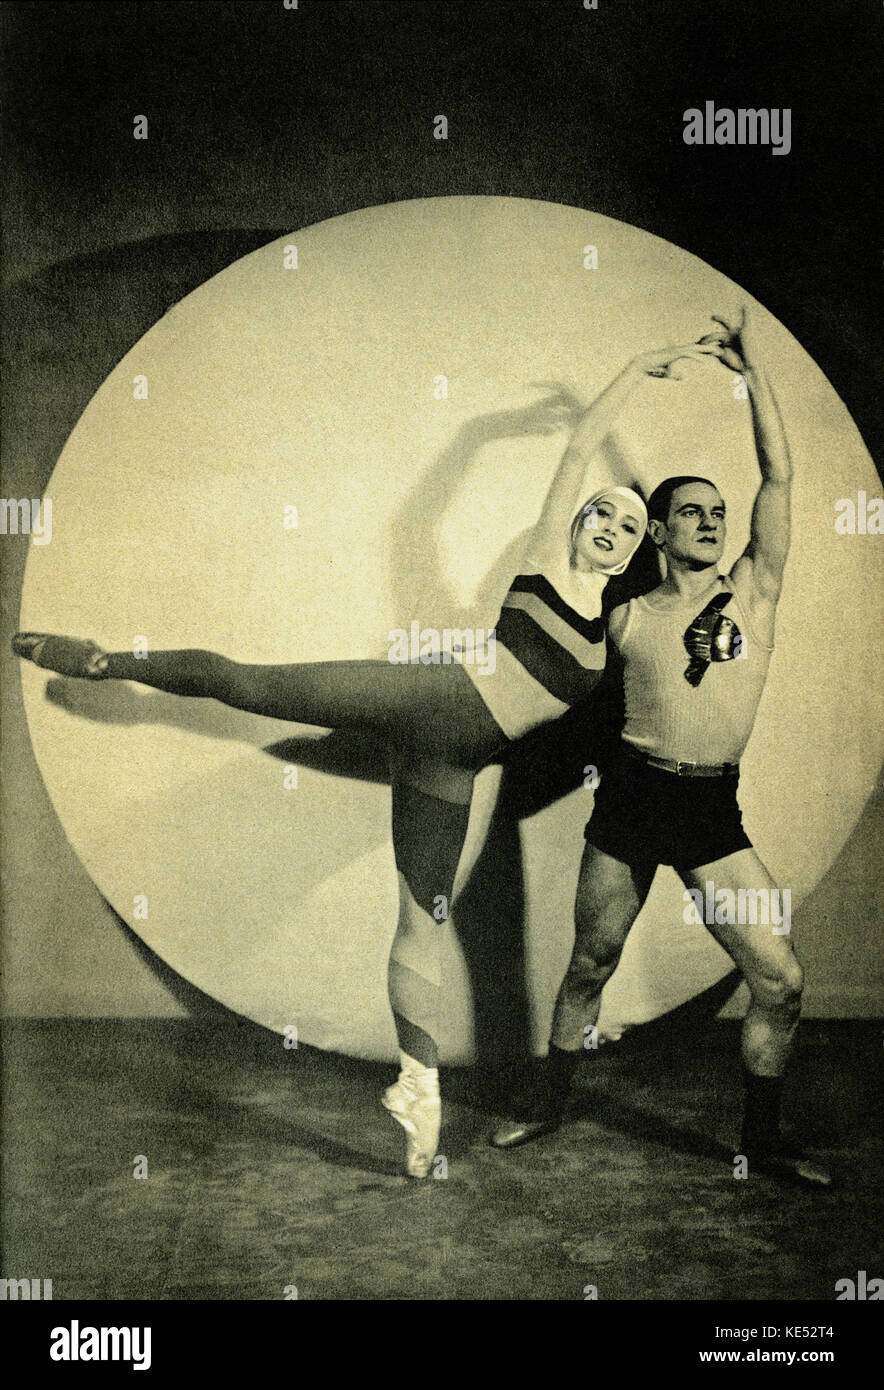 Irina Baronova and León Woizikovski - in Jeux d'Enfants. Music by Georges Bizet, choreography by Leonide Massine, set design by Joan Miro. Premiered by the Ballet Russe de Monte Carlo in Monte Carlo on 14 April 1932. IB: Russian ballet dancer, b. 13 March 1919. GB: French composer, 25 October 1838 -3 June 1875 Stock Photo